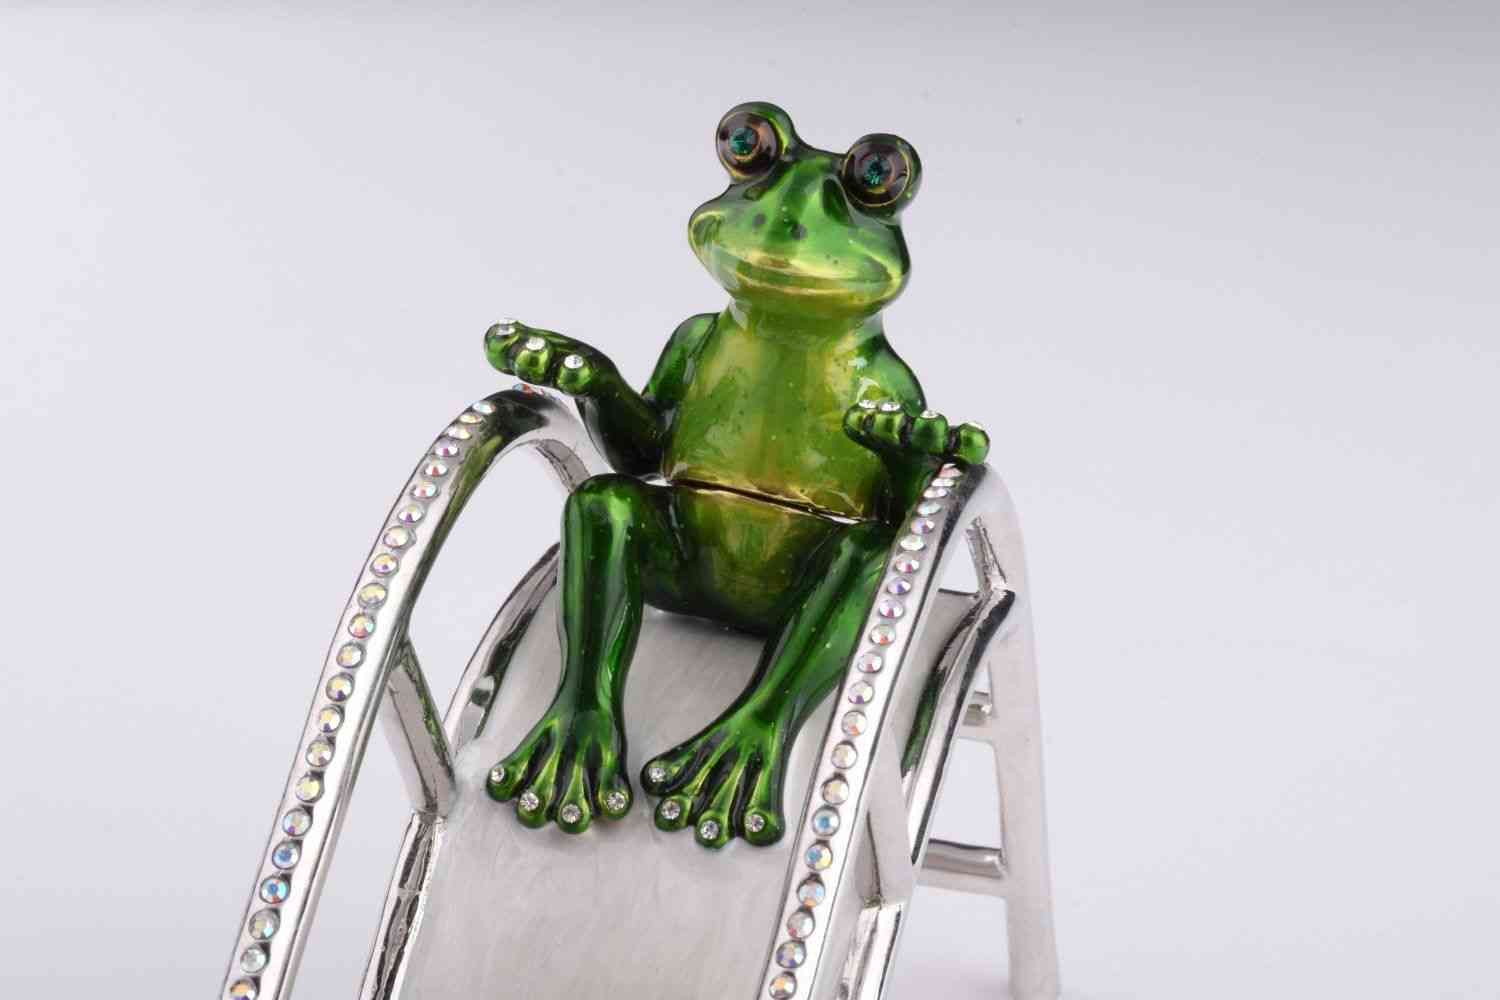 Two Frogs Riding Slide-trinket Box